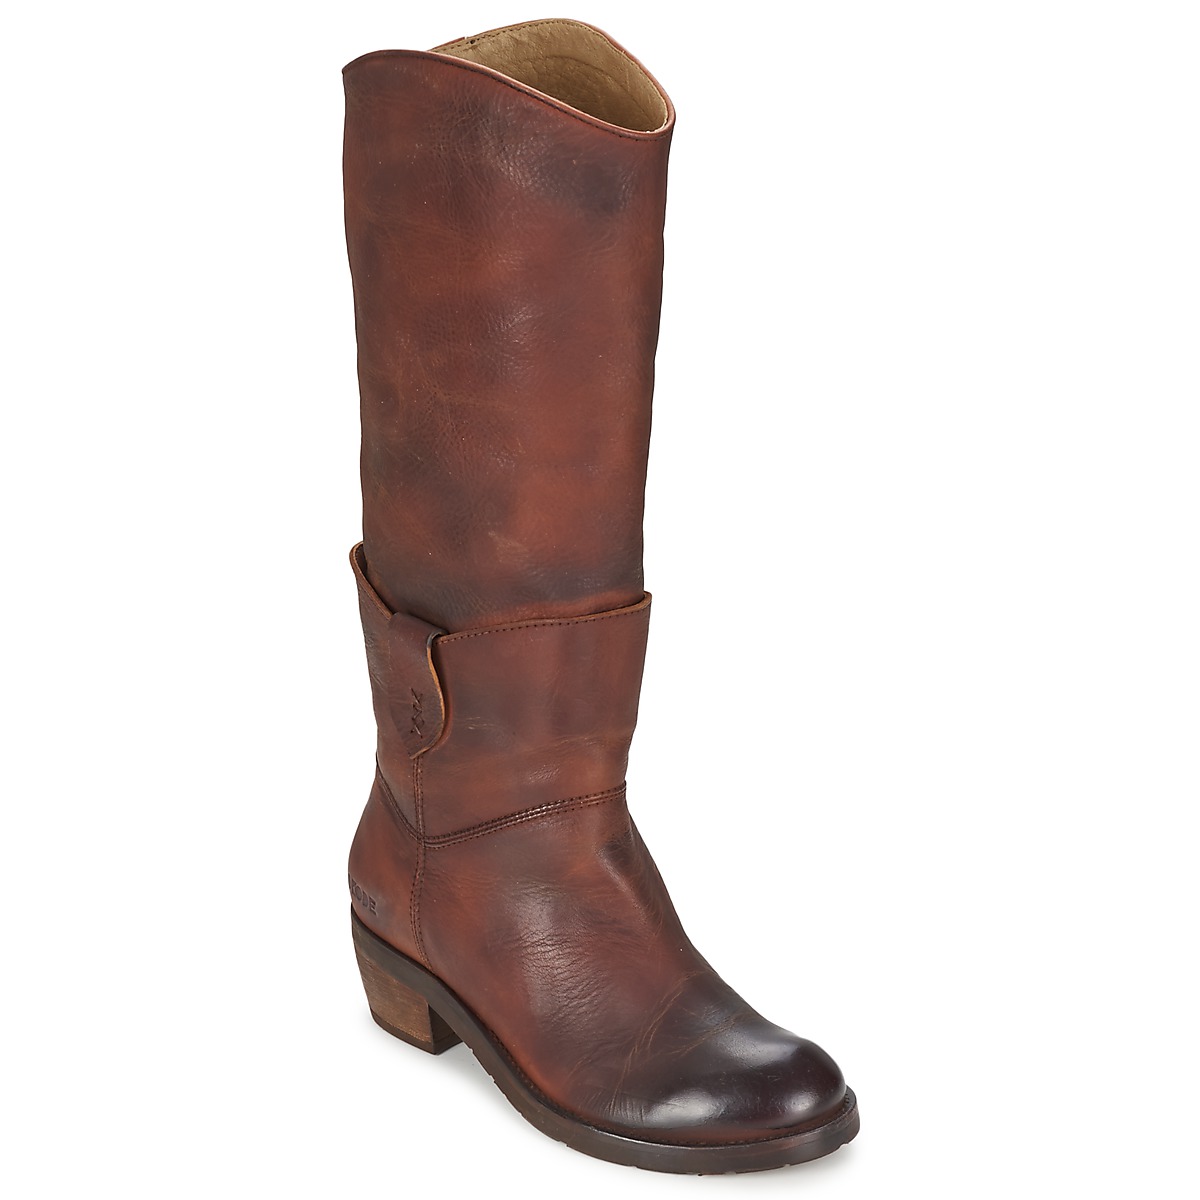 High boots Dkode INDIANA Brown / Dark - Free delivery with Spartoo.co ...